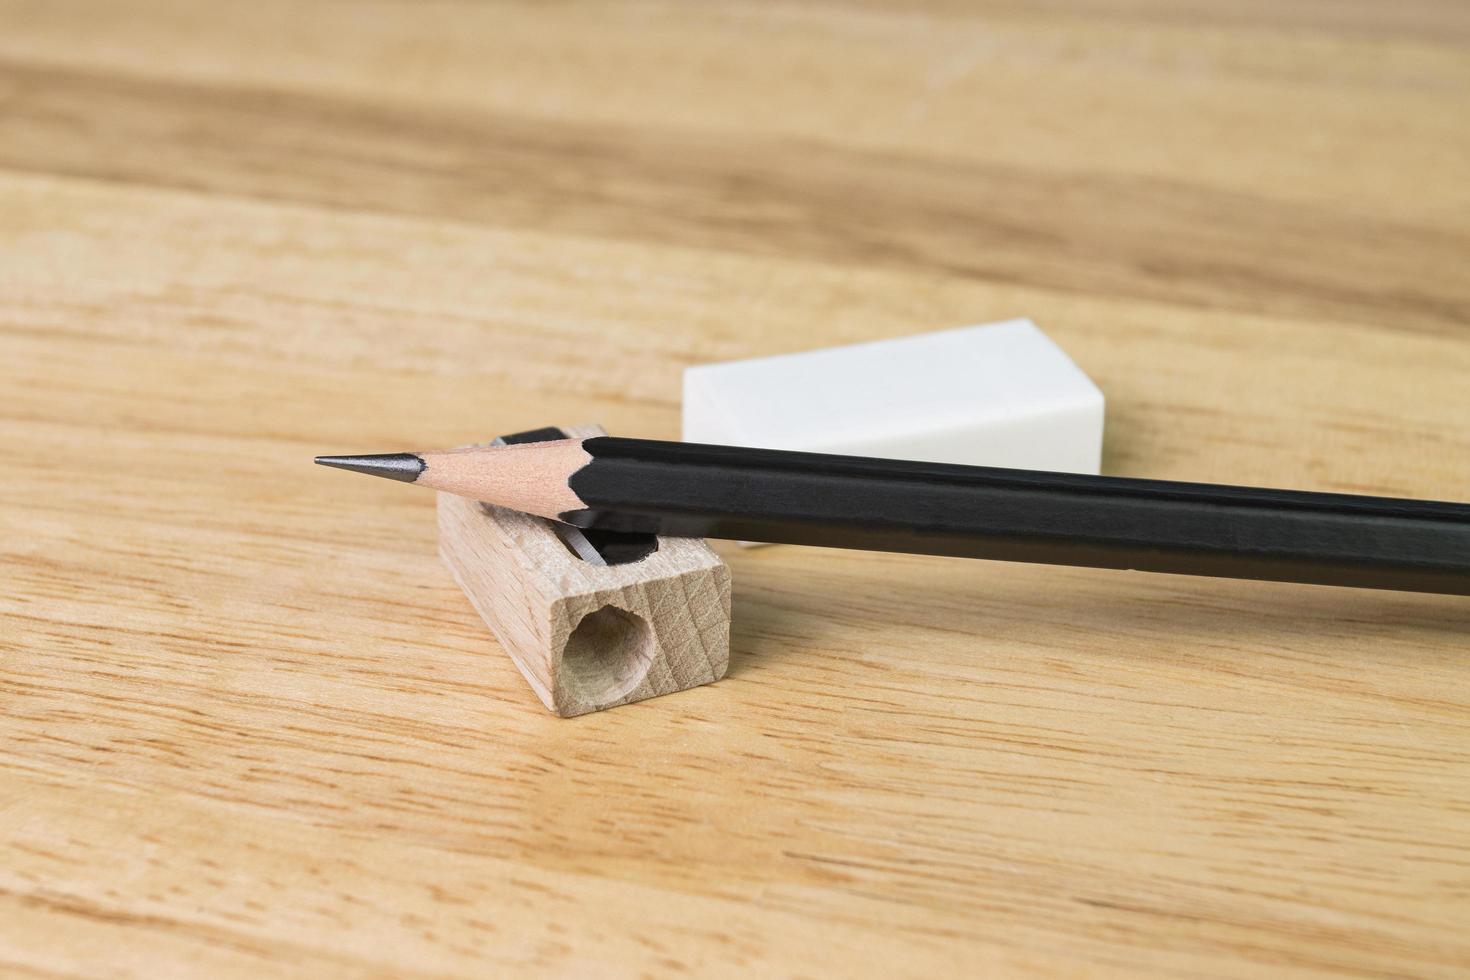 pencil and Pencil sharpener on wood table photo